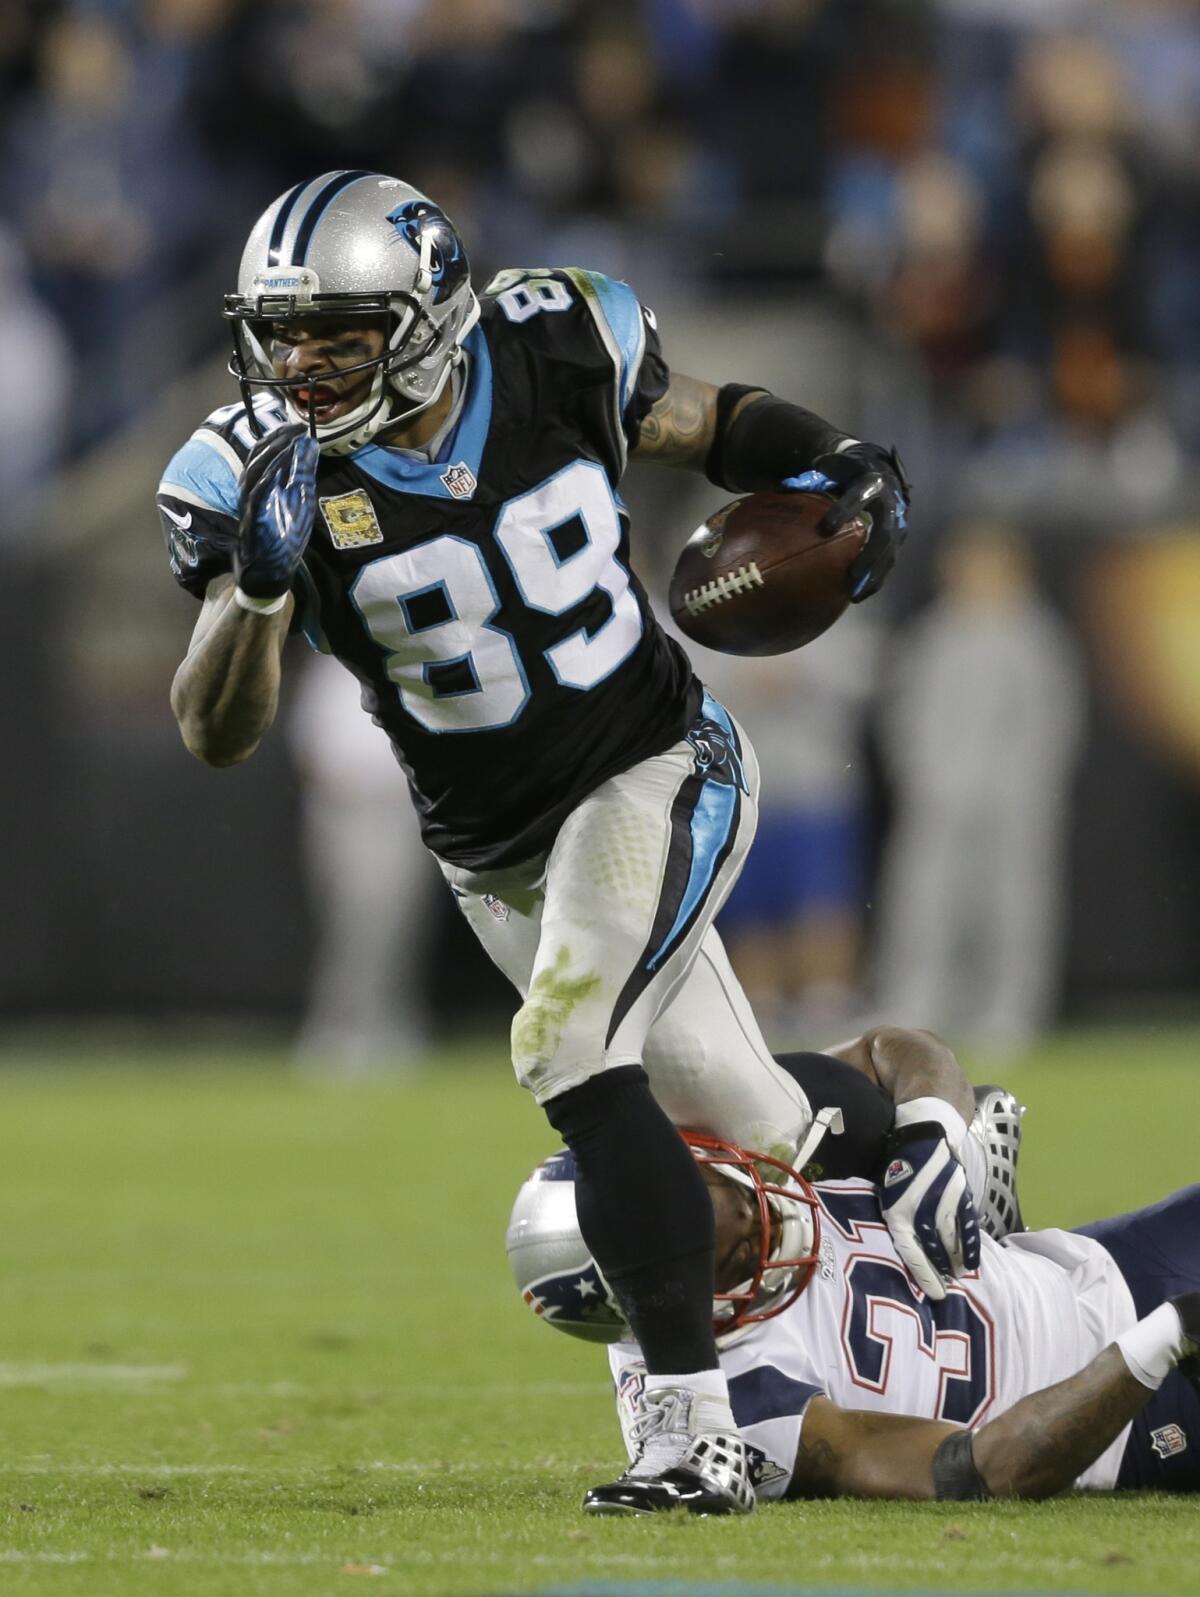 Carolina Panthers wide receiver Steve Smith says he performs well in a chaotic environment. Sunday night's game against the New Orleans Saints should provide the veteran with plenty of opportunities to excel under pressure.